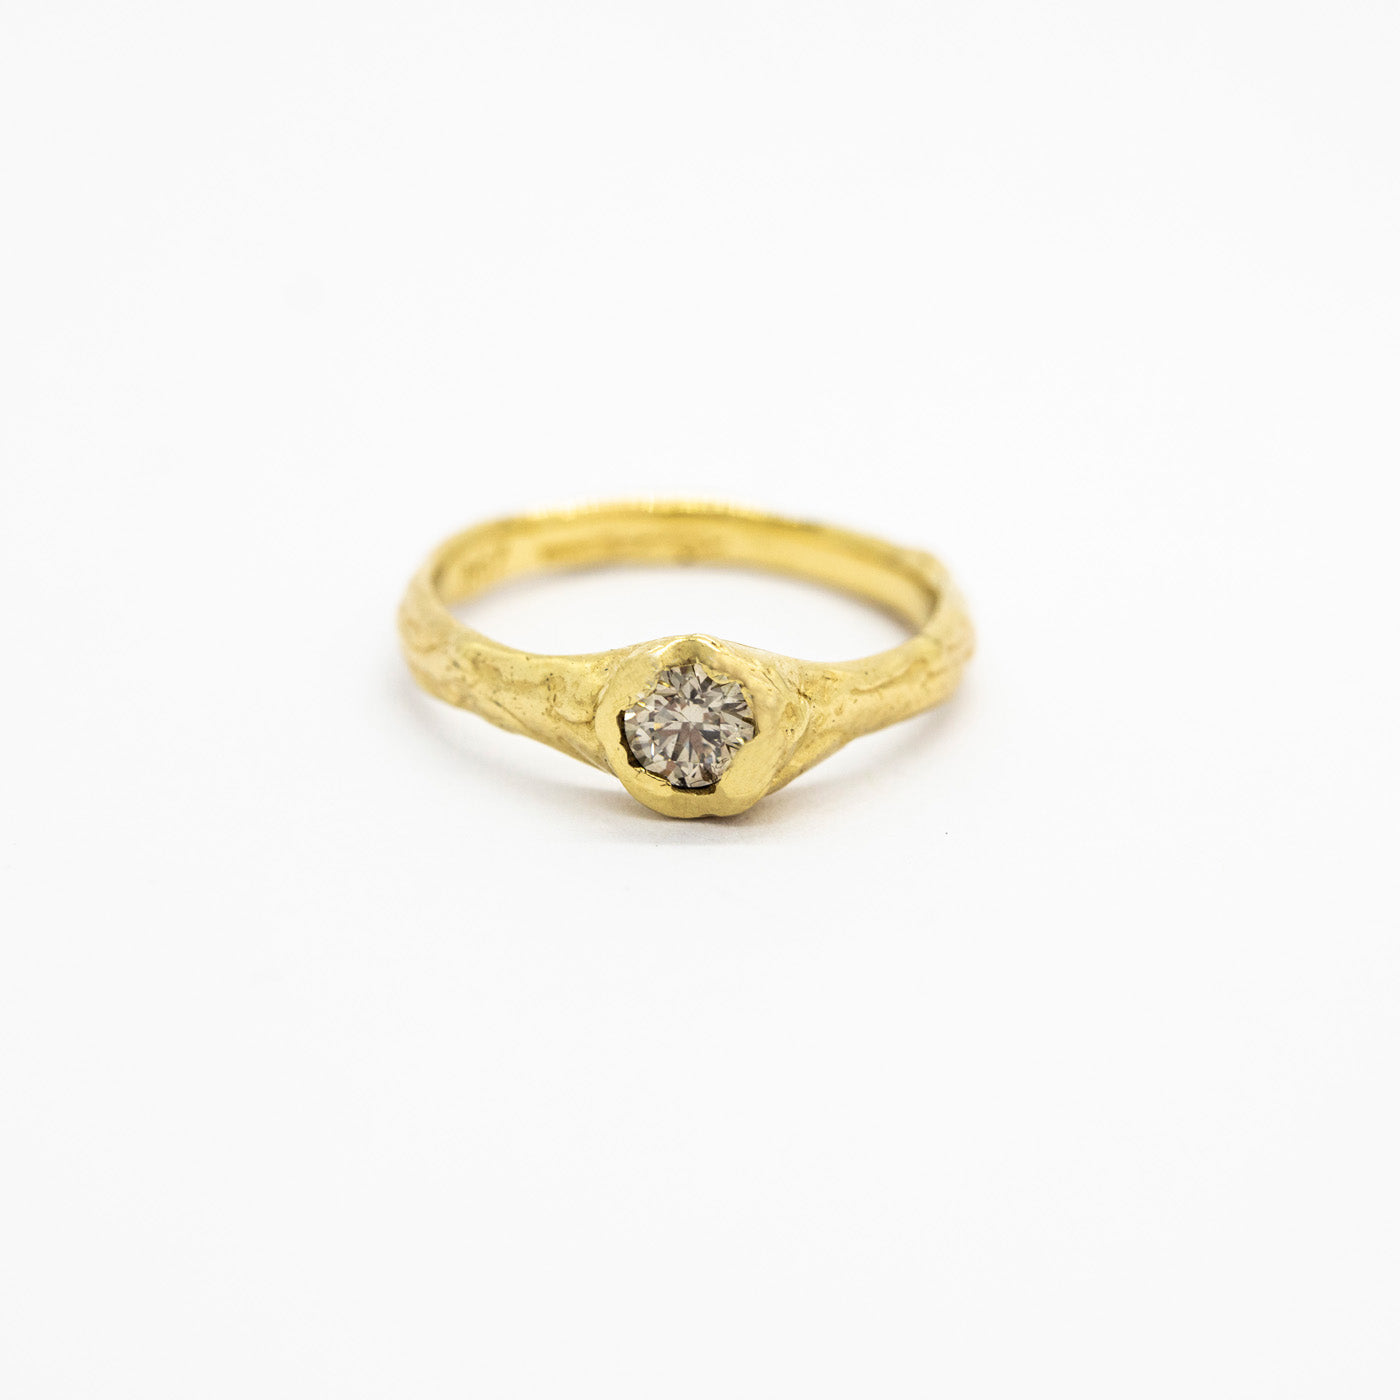 Ring Verve 14ct or 18ct yellow gold champagne diamond front product view innan independent jewellery atelier berlin